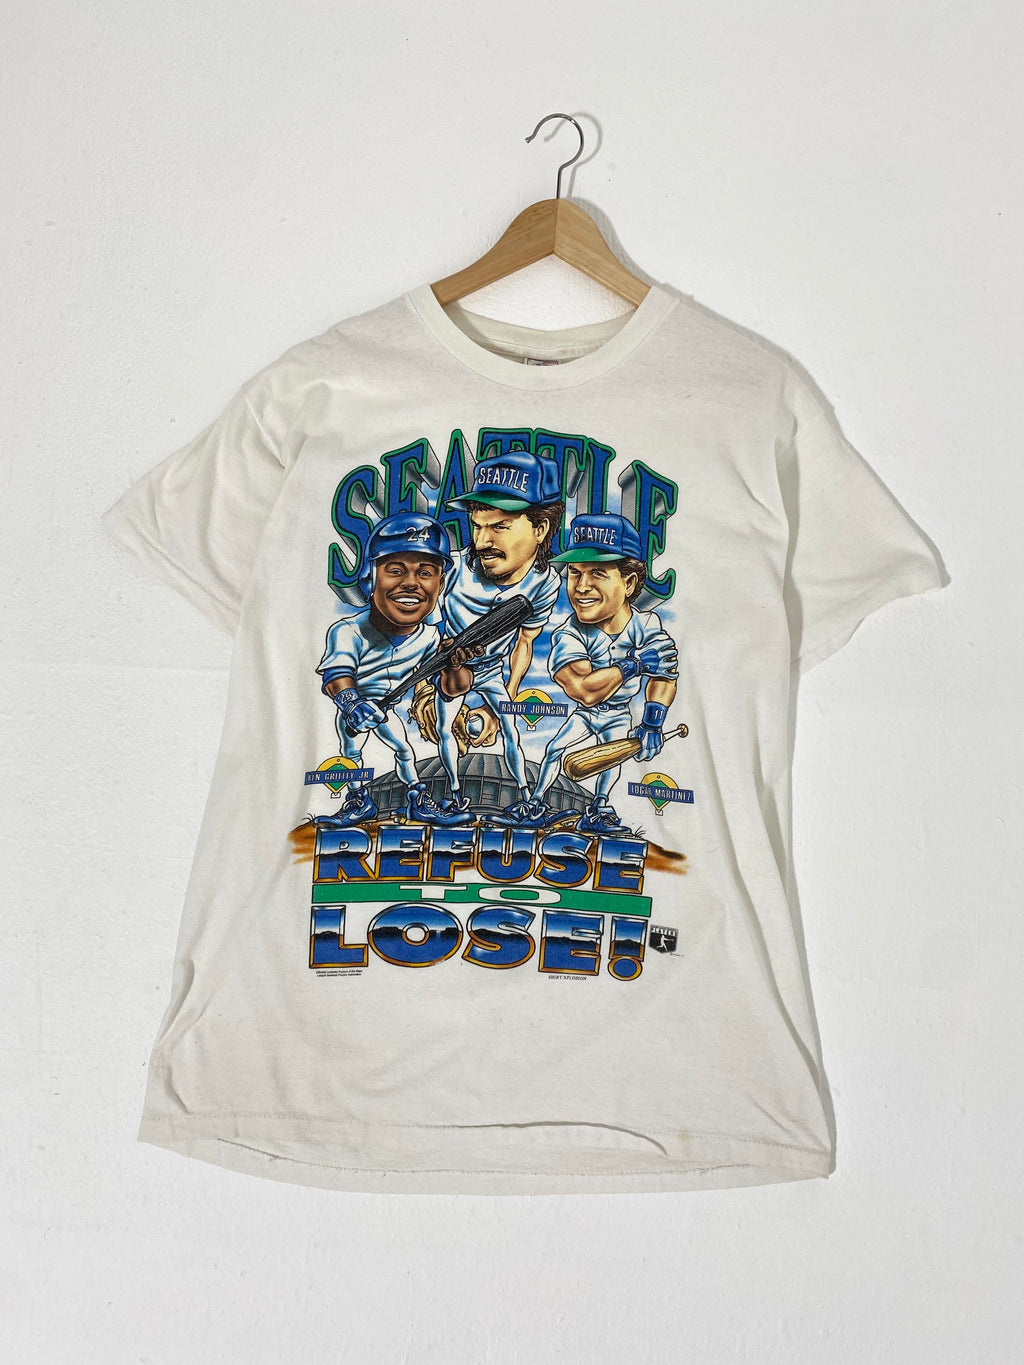 Official Vintage Mariners Clothing, Throwback Seattle Mariners Gear, Mariners  Vintage Collection